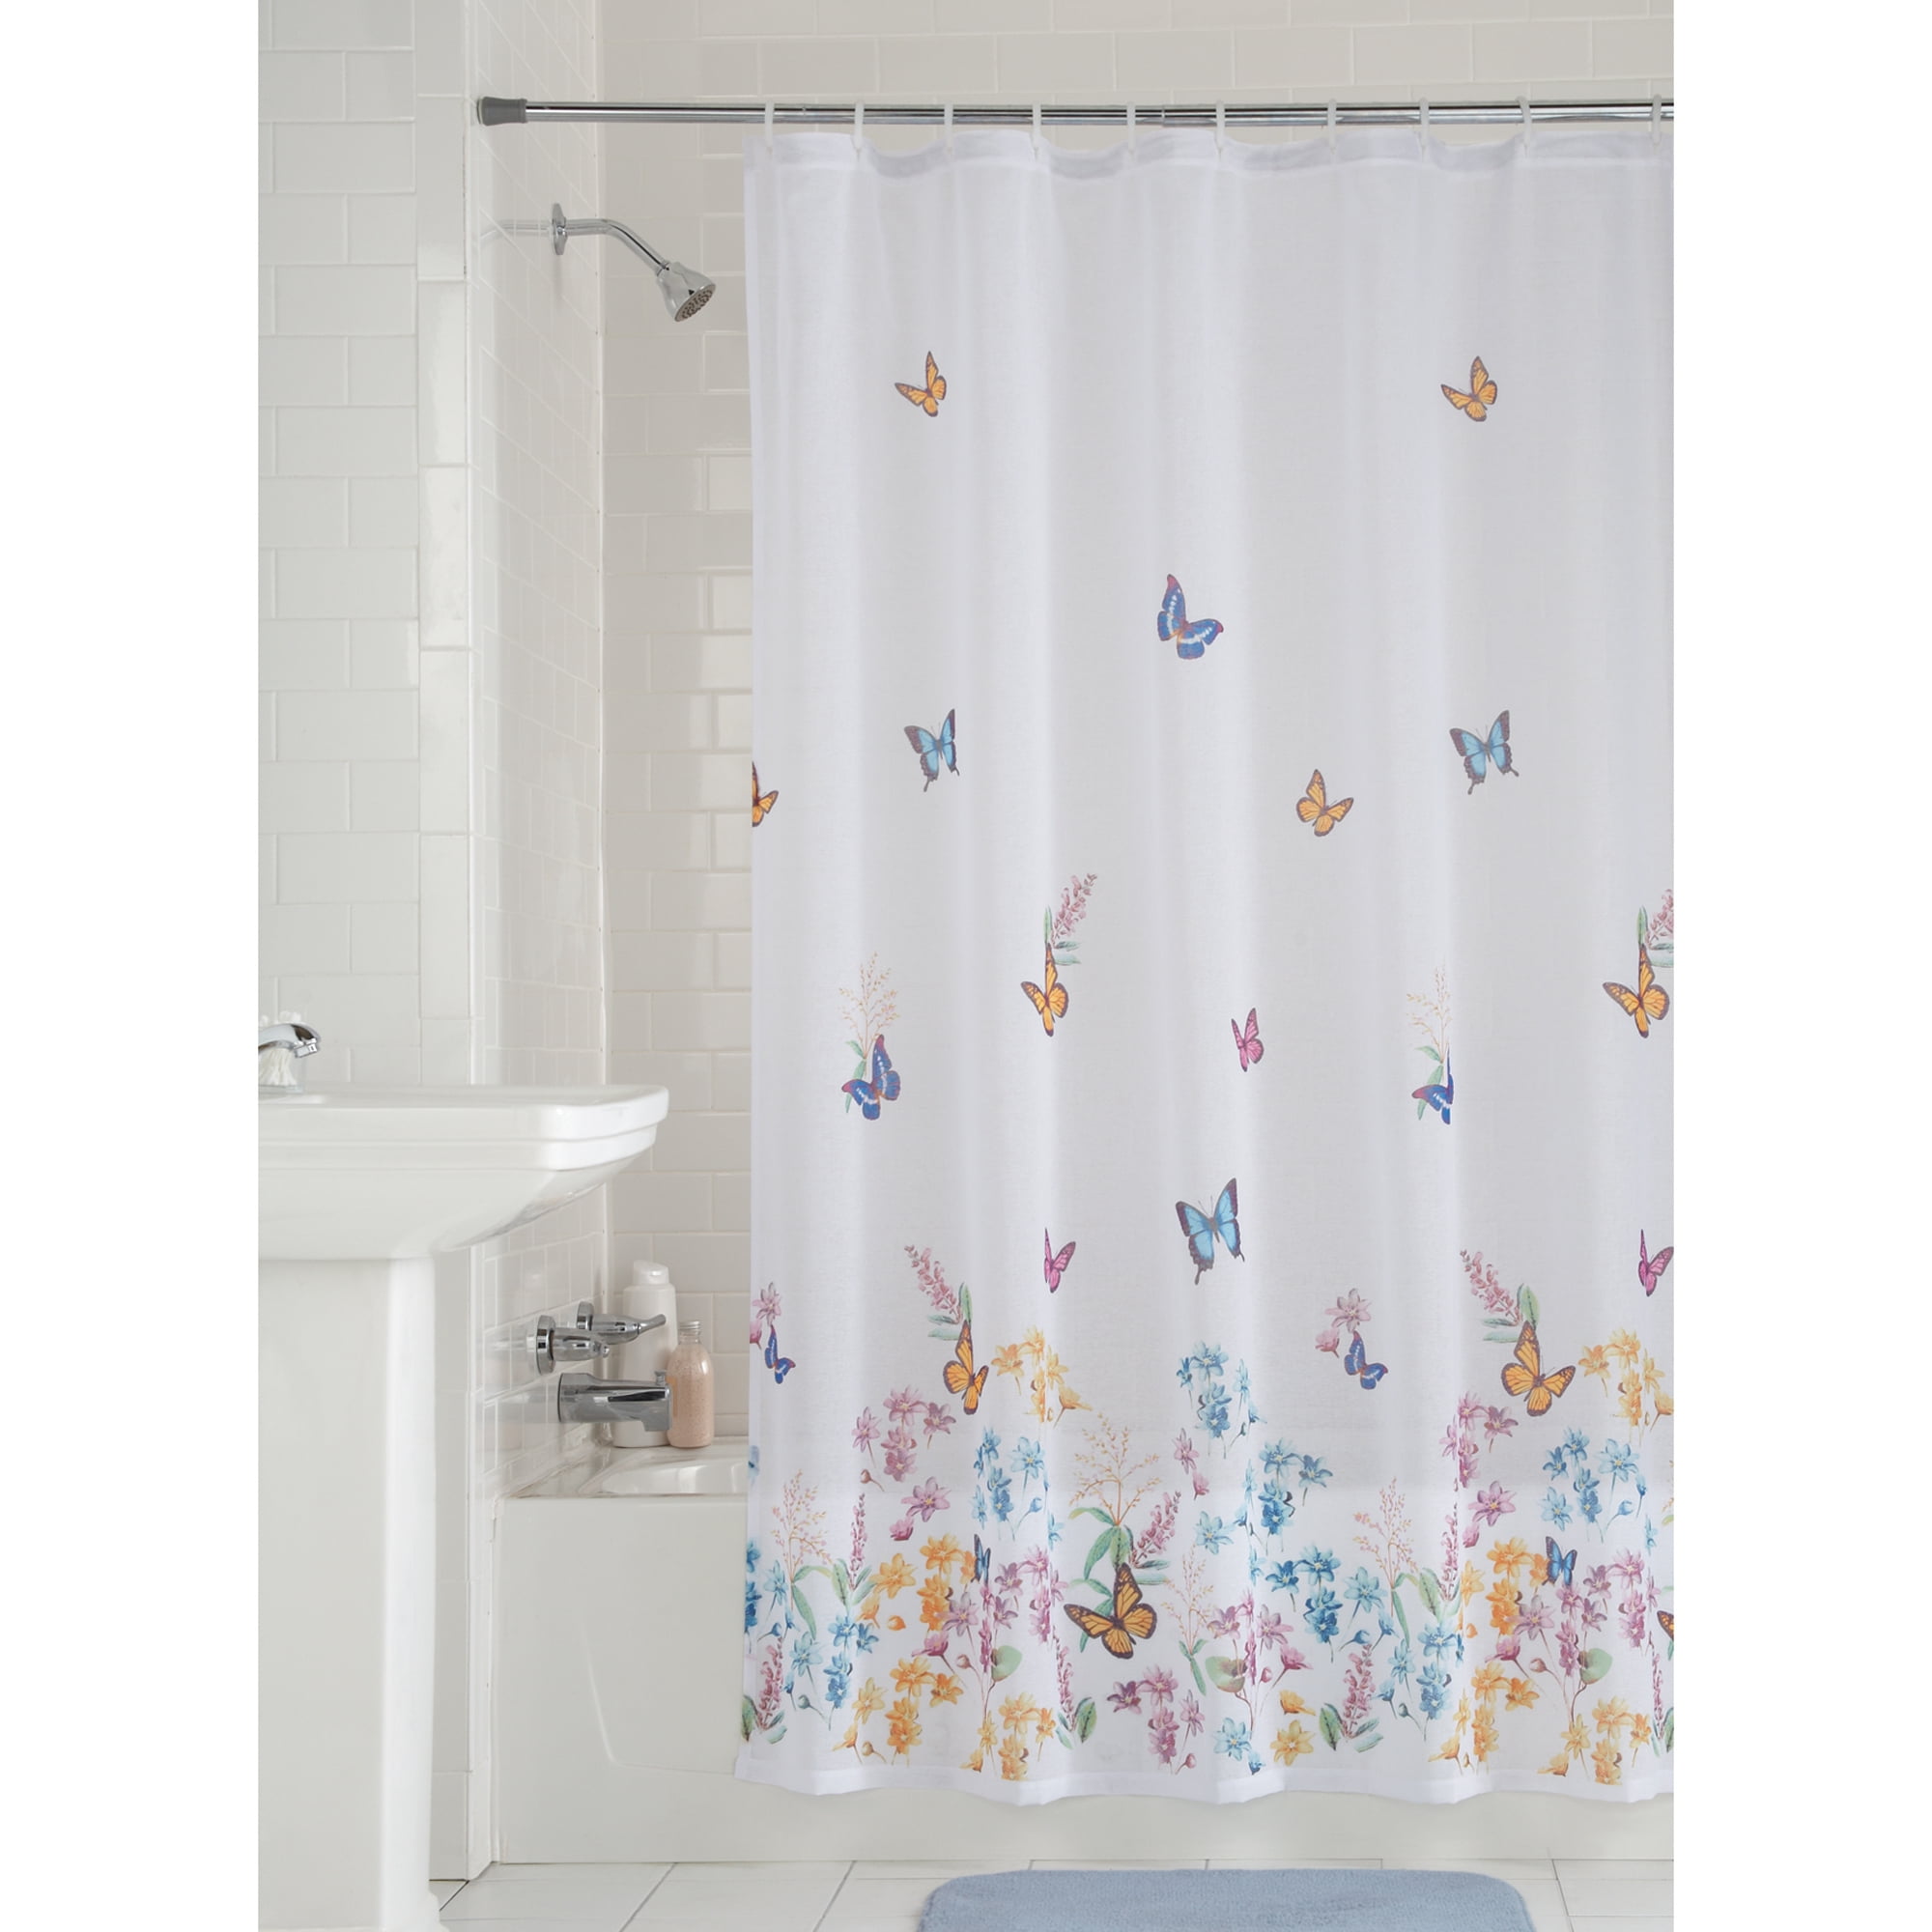 Details about   Butterfly Flying Flower Type Thick Waterproof Shower Curtain Bathroom 12 Hooks 